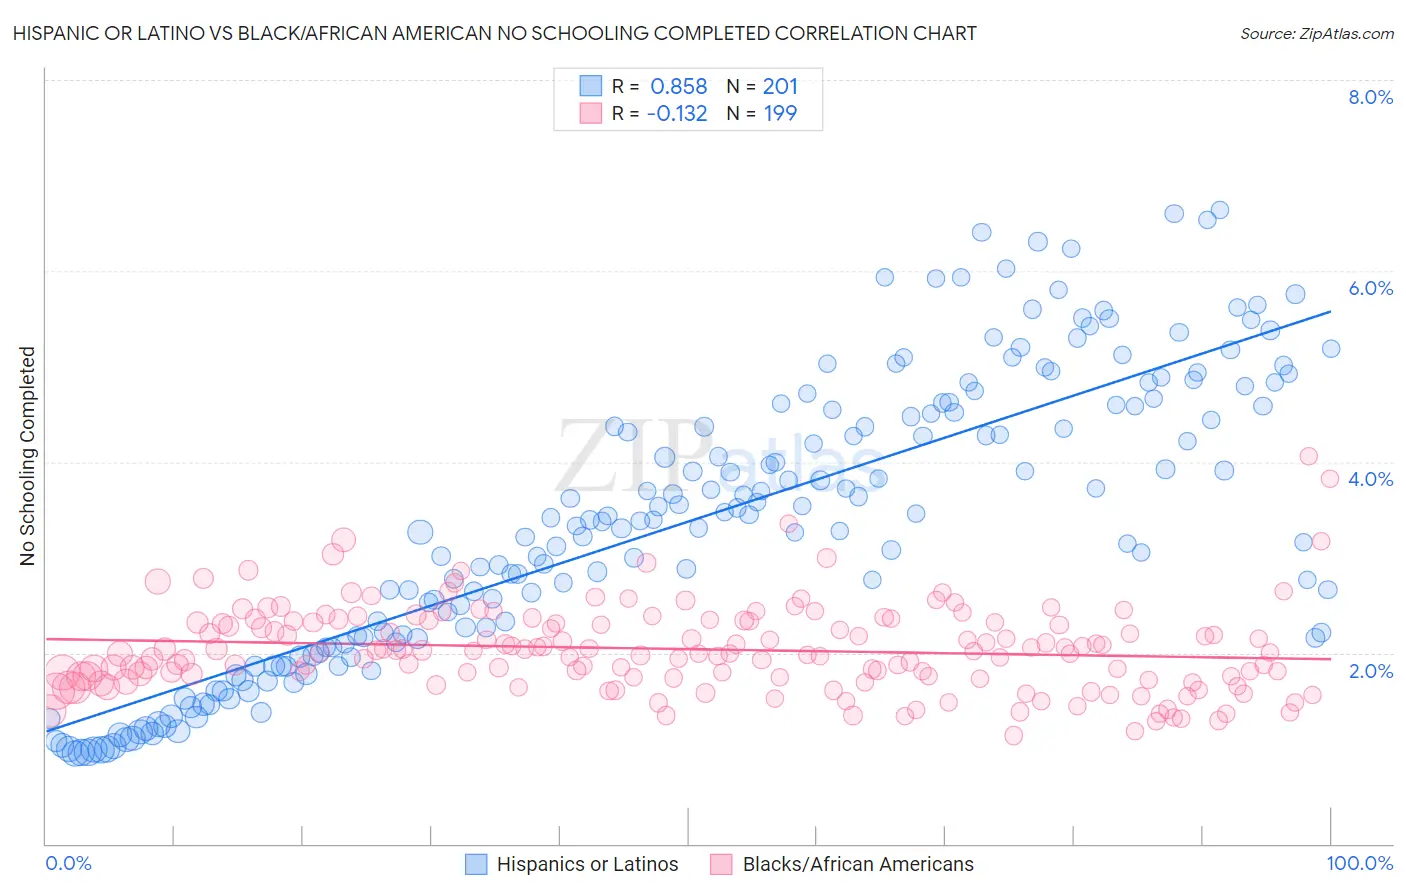 Hispanic or Latino vs Black/African American No Schooling Completed